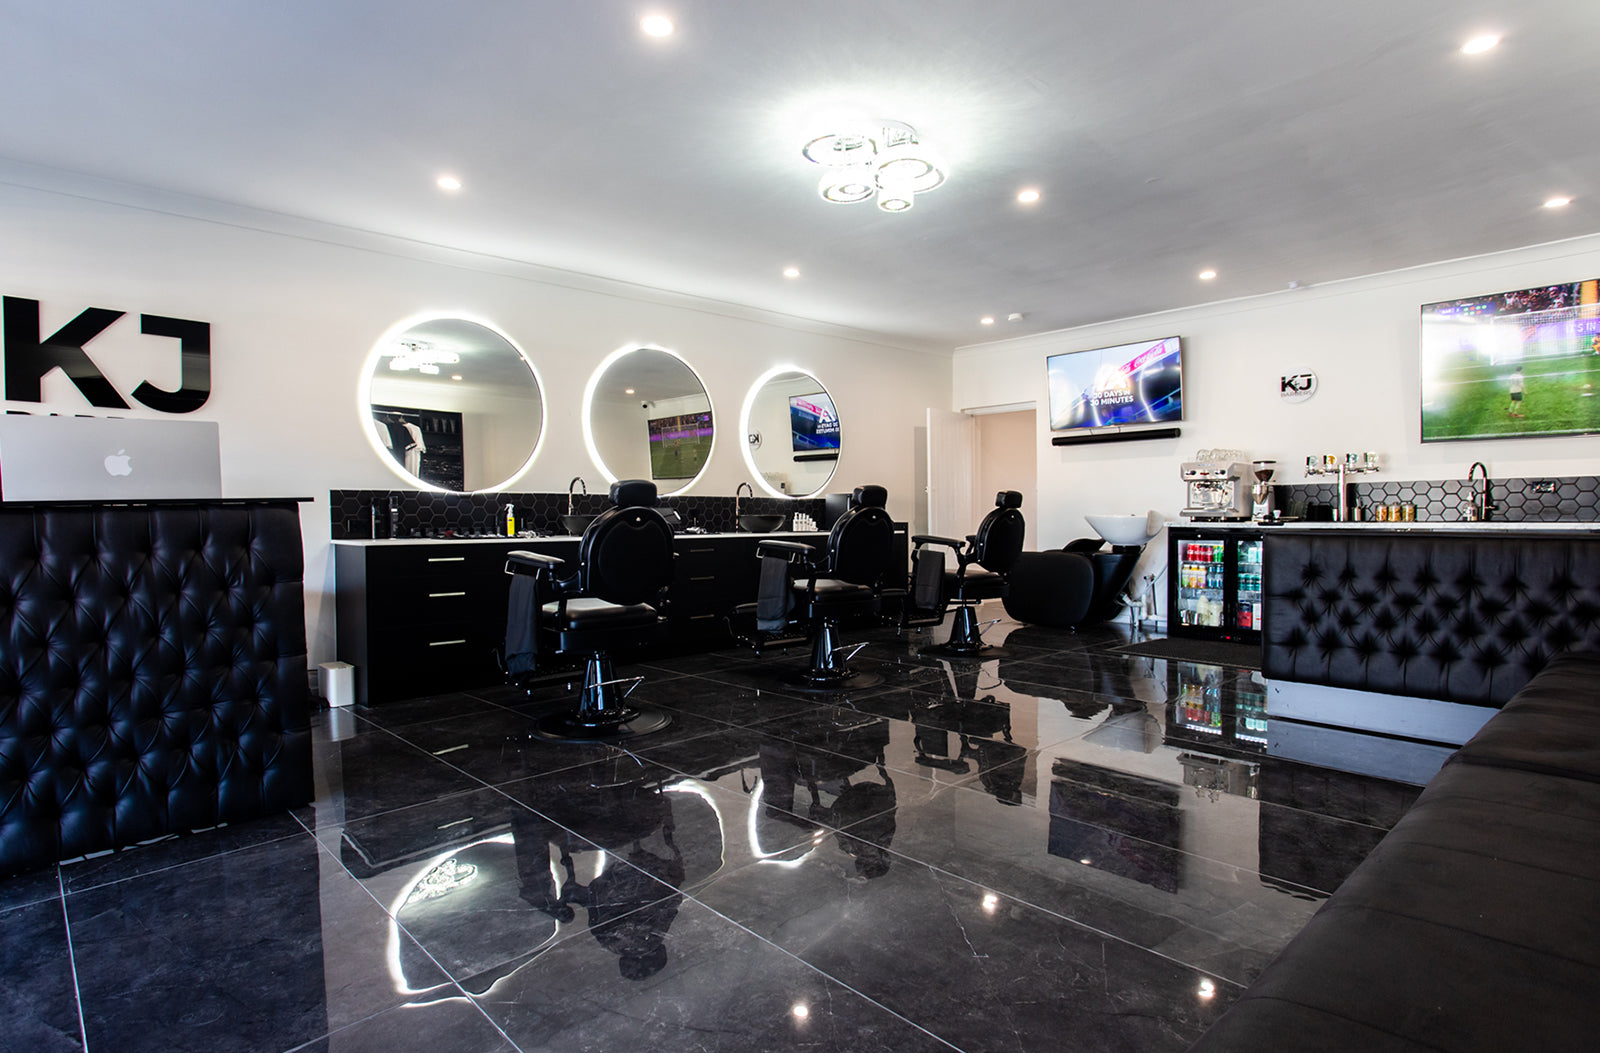 KJ Barbers extraordinary fit-out, complete with a bar and Playstation 5